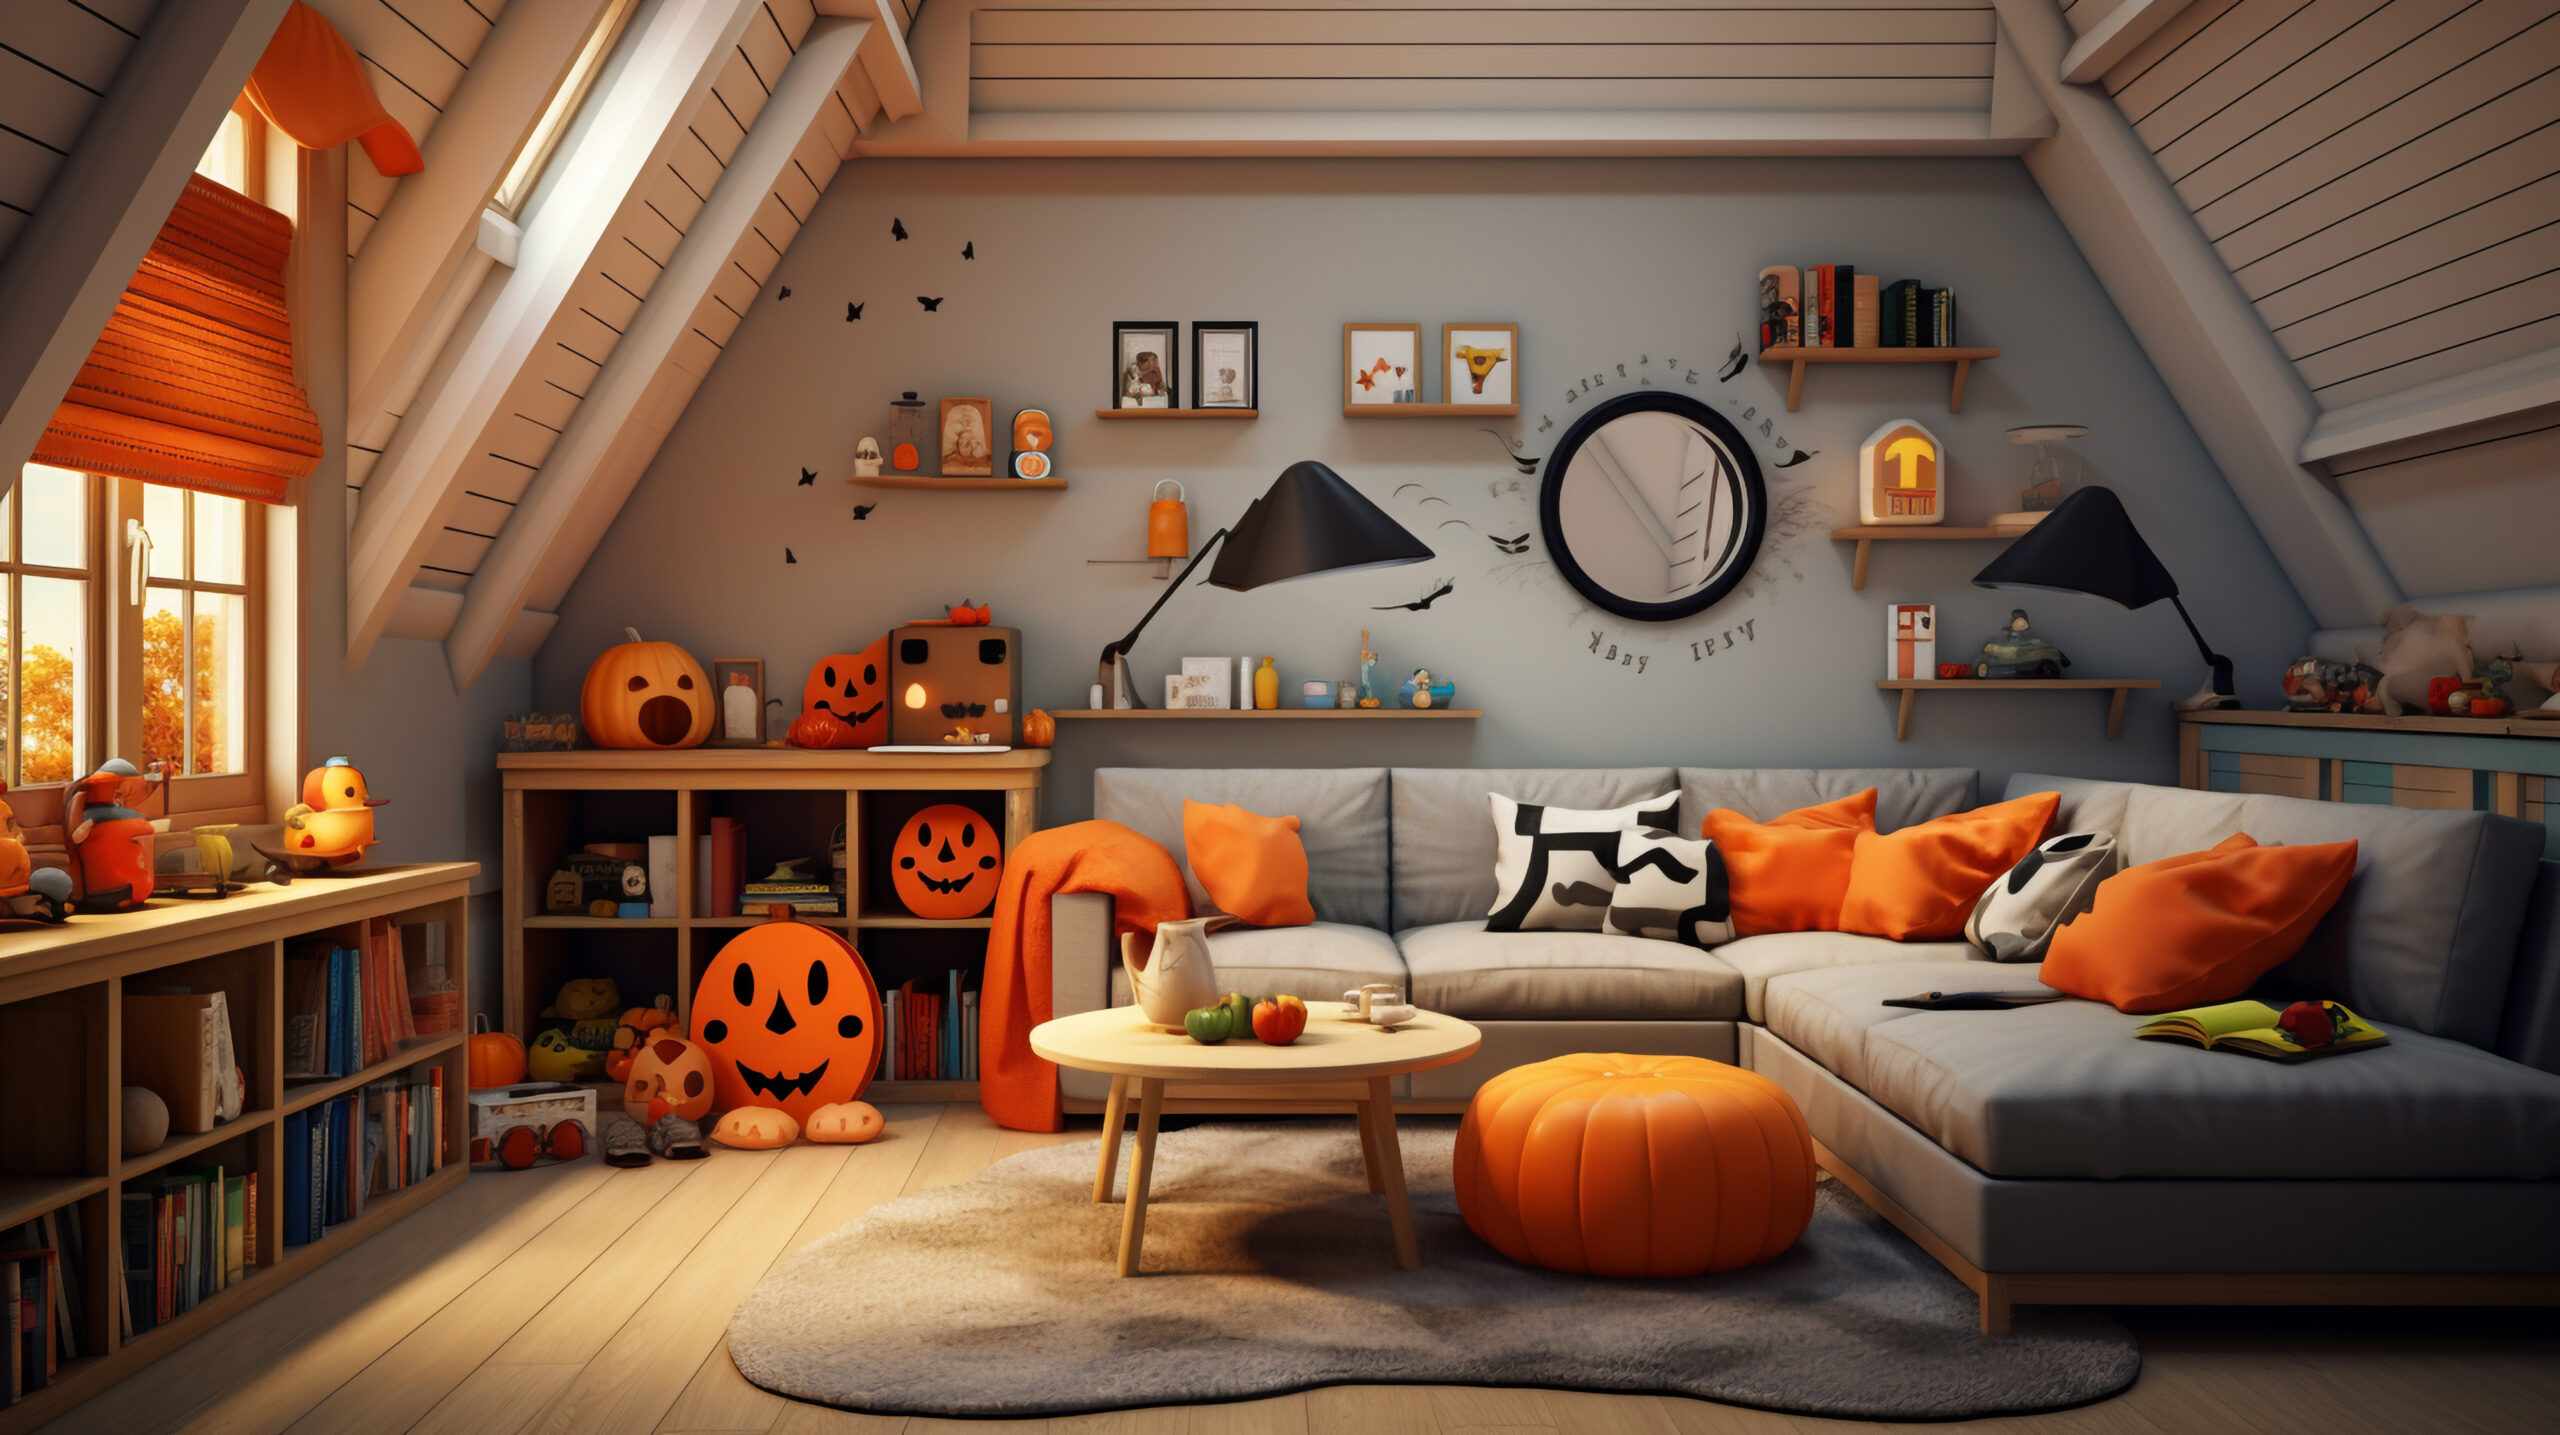 https://www.southernmanagement.com/wp-content/uploads/2019/10/halloween-decor-themes-apartments-scaled.jpeg